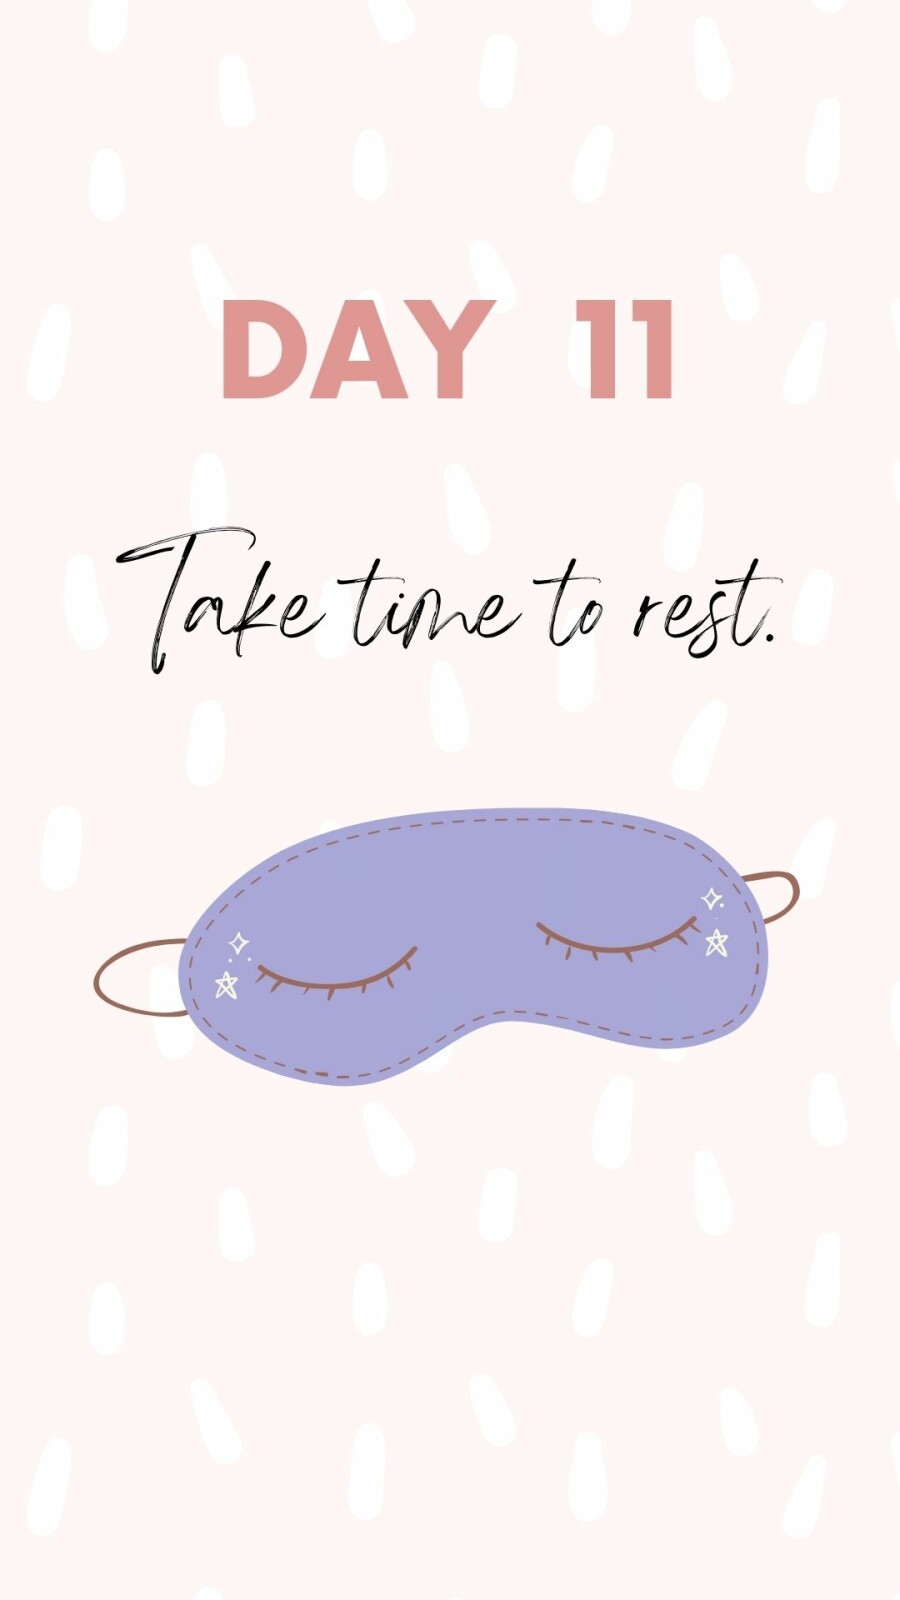 Self Love 101 Take time to rest - day 11